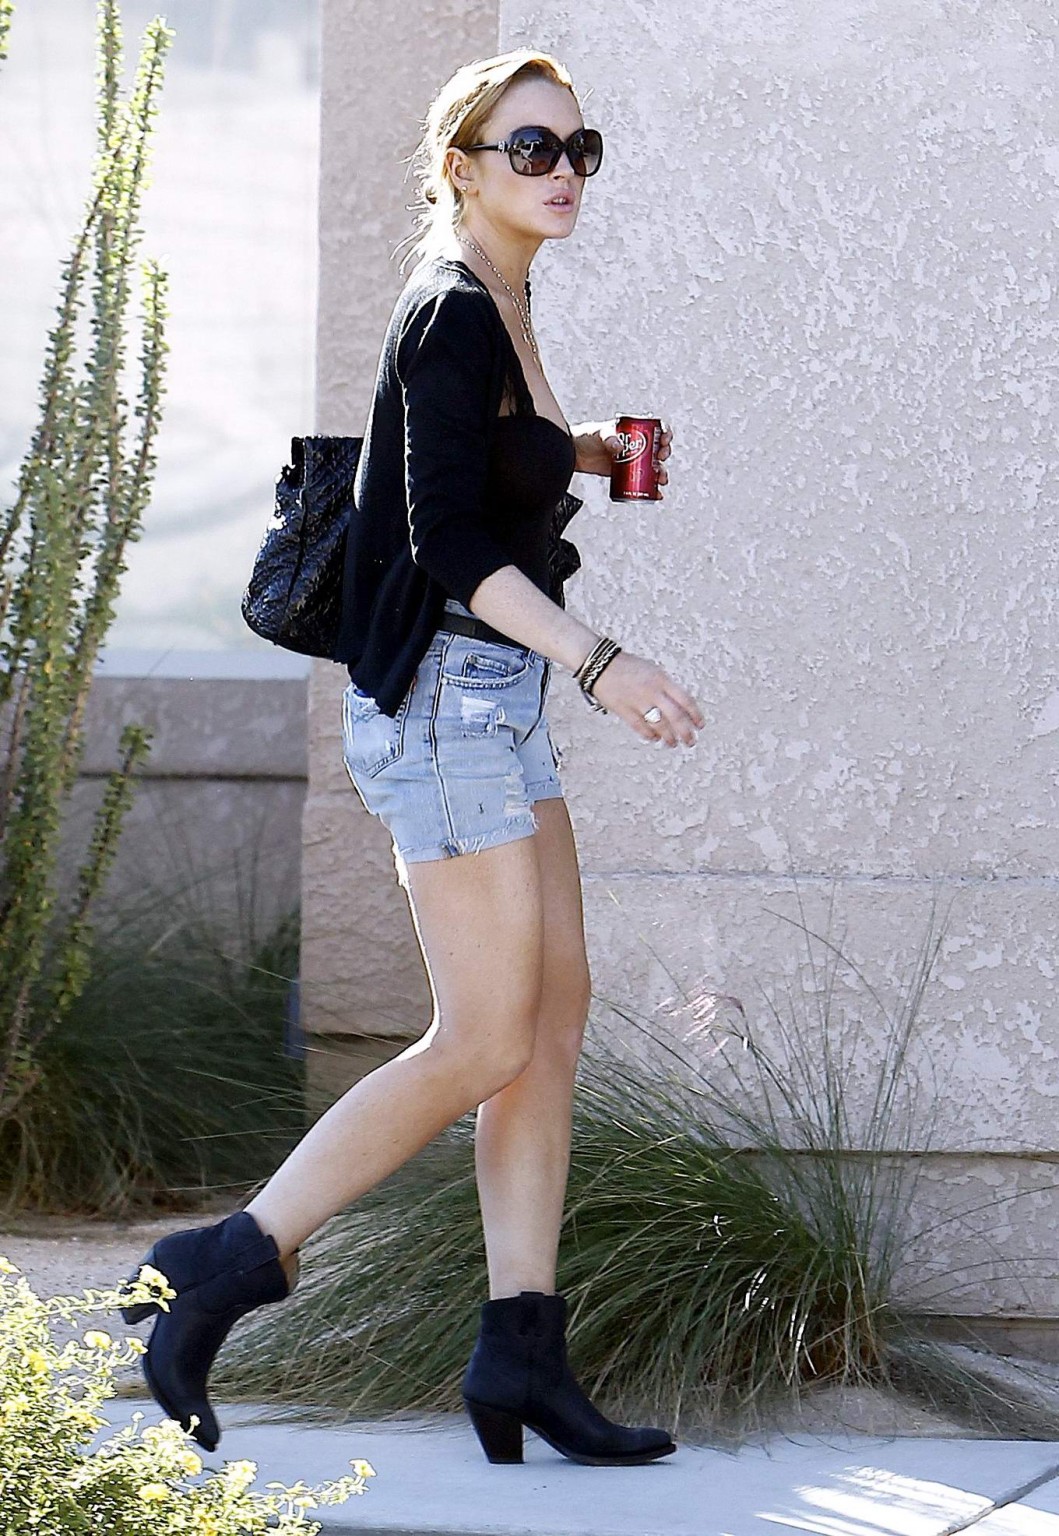 Lindsay Lohan leggy  cleavy wearing low cut top  denim shorts at the Betty Ford  #75326072